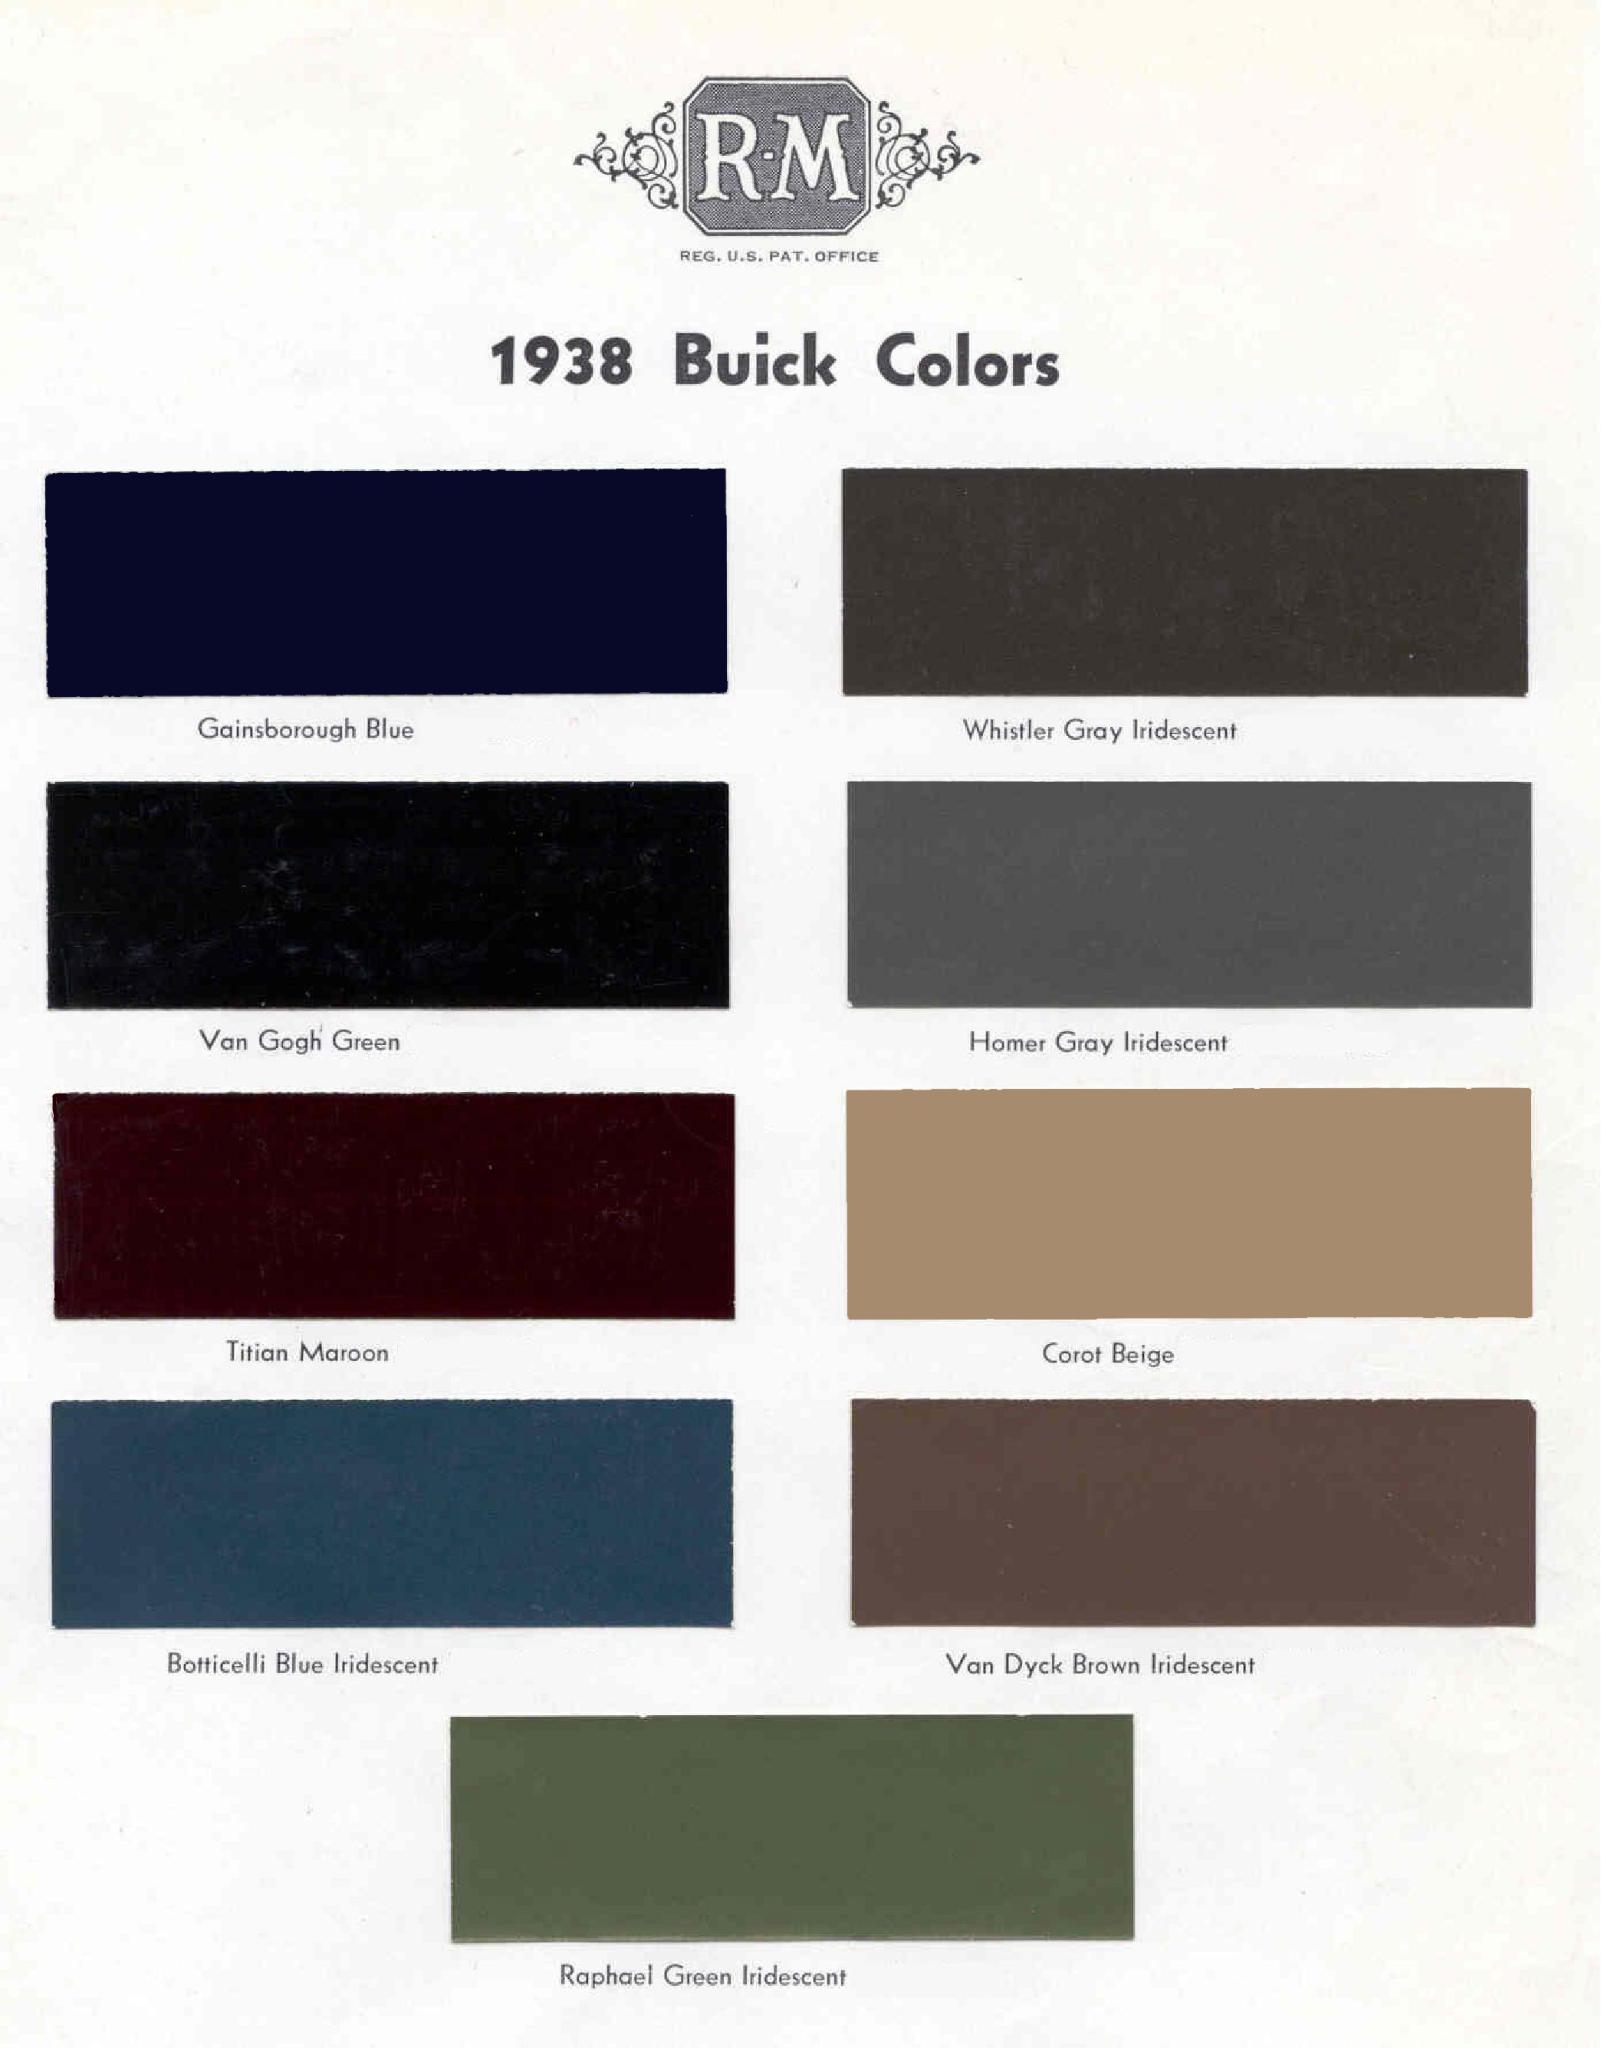 Paint Color names used on the 1938 Buicks